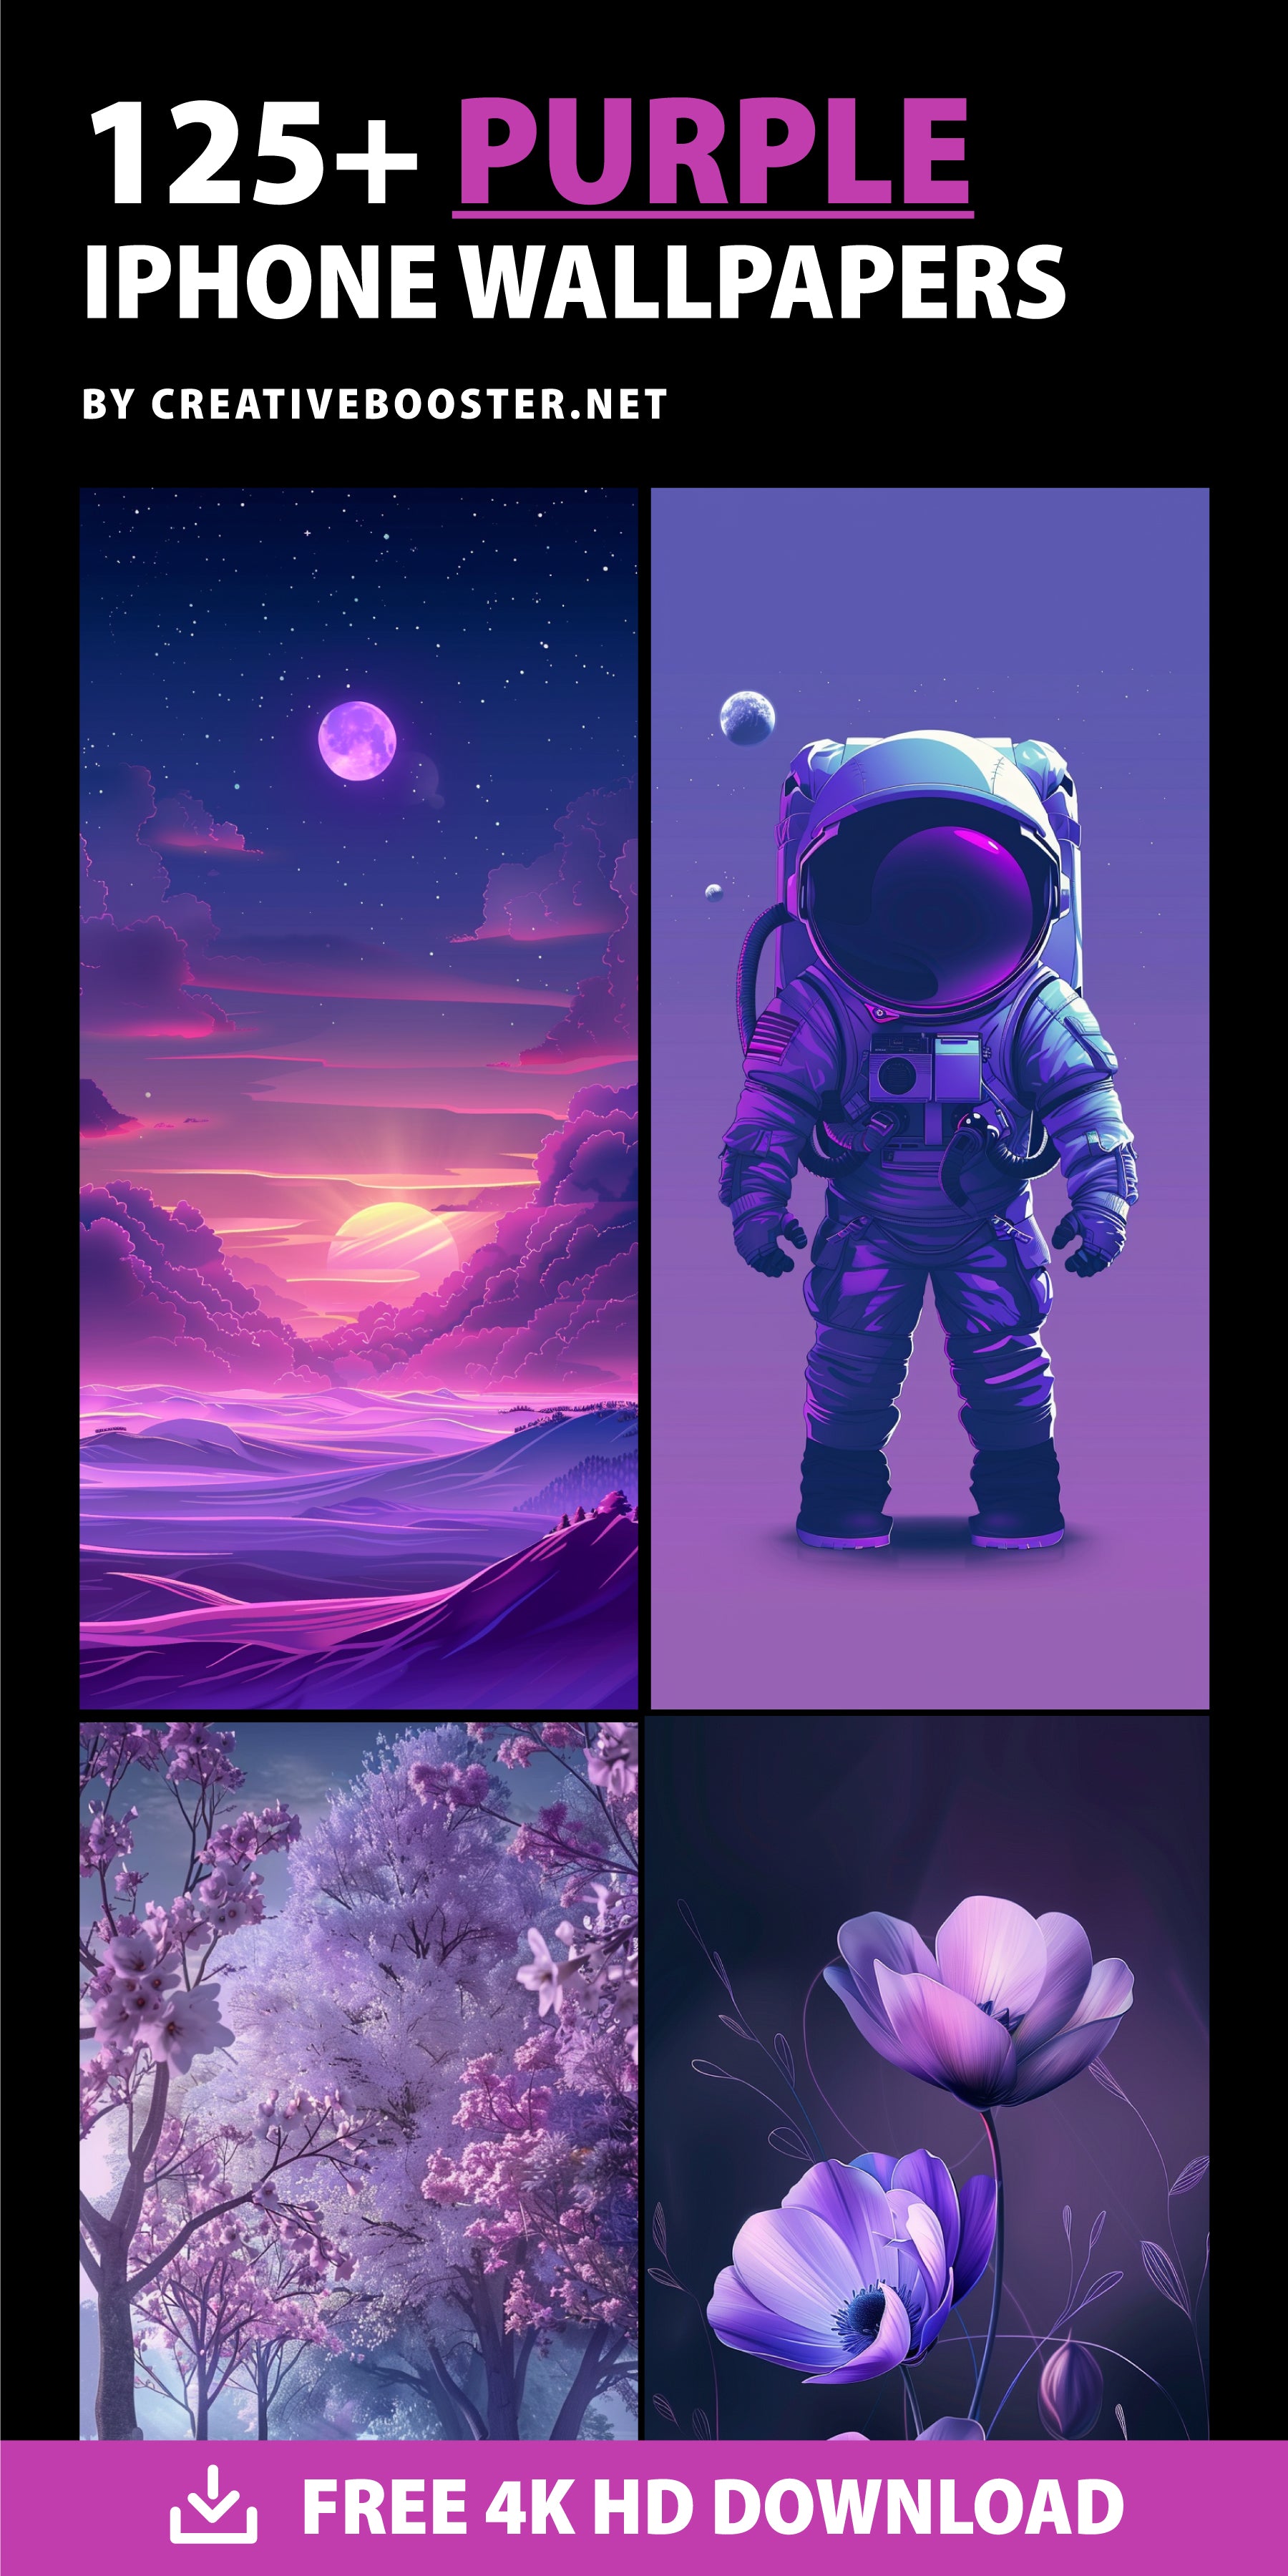 Best-Aesthetic-Purple-iPhone-Wallpapers-Free-4k-HD-Download-Pinterest-Tall